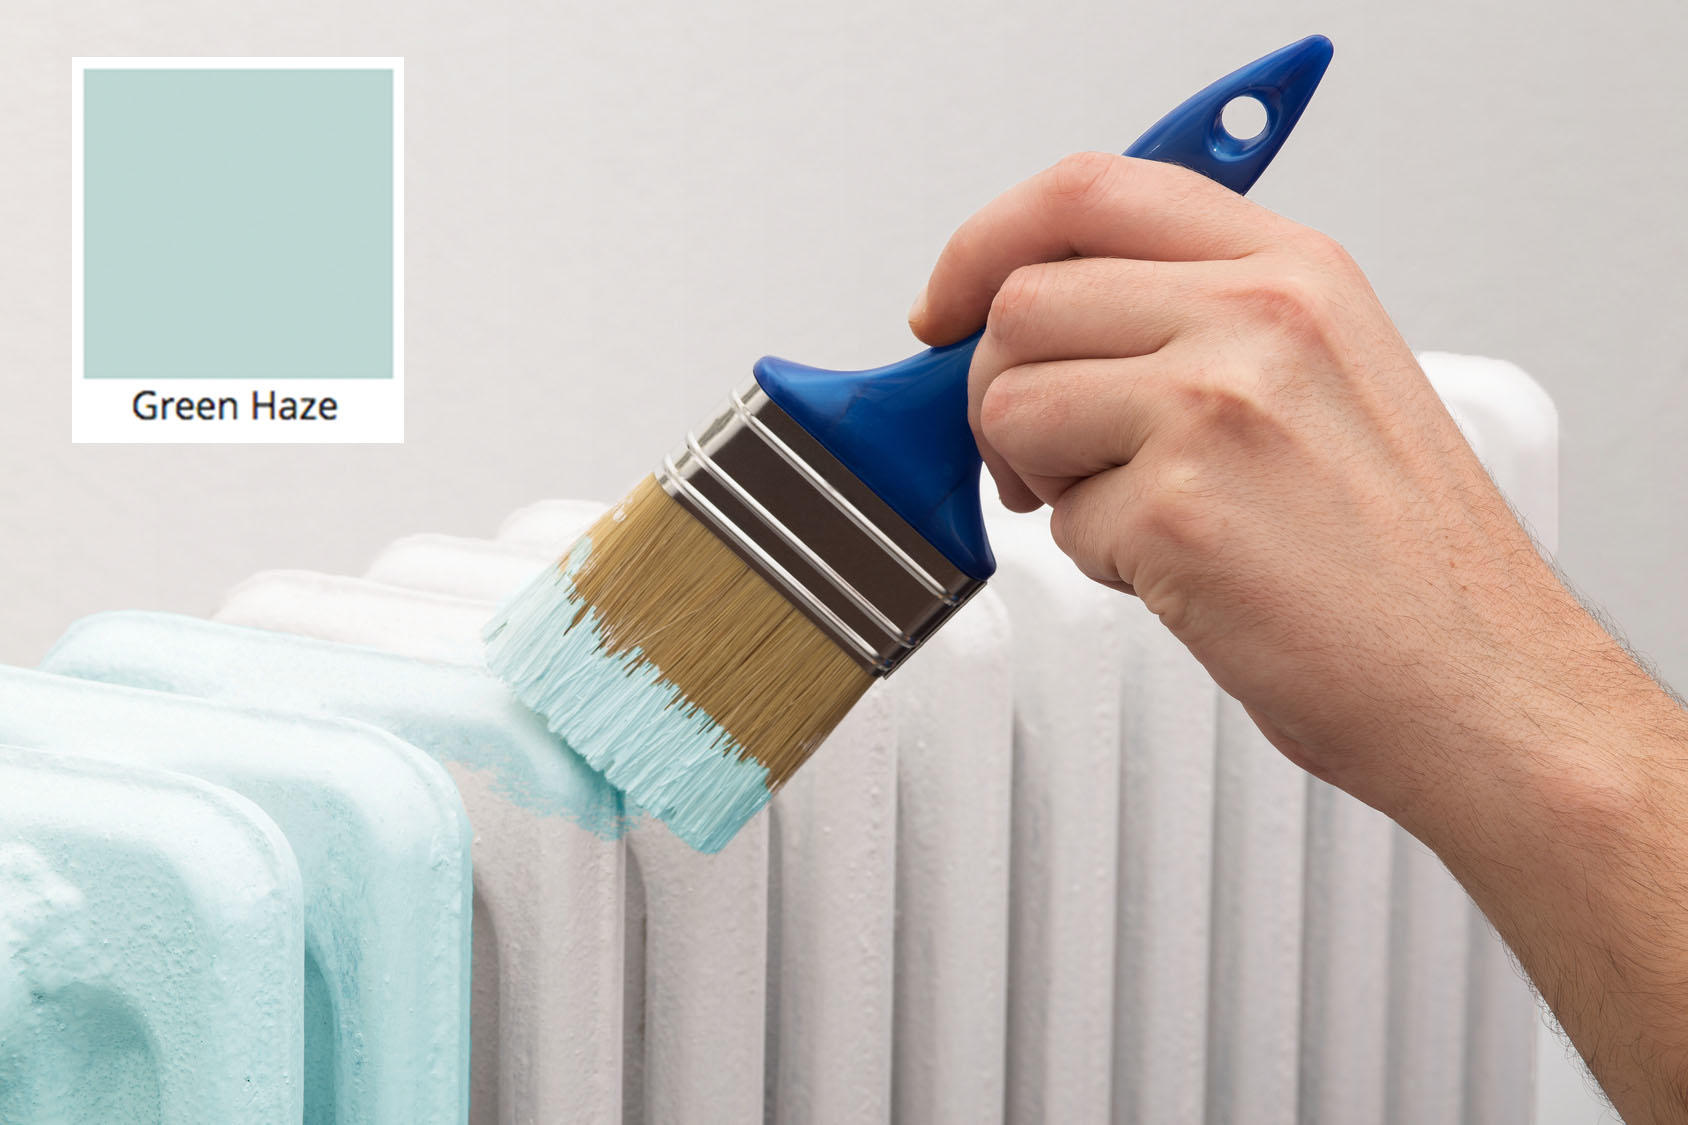 how to paint a radiator